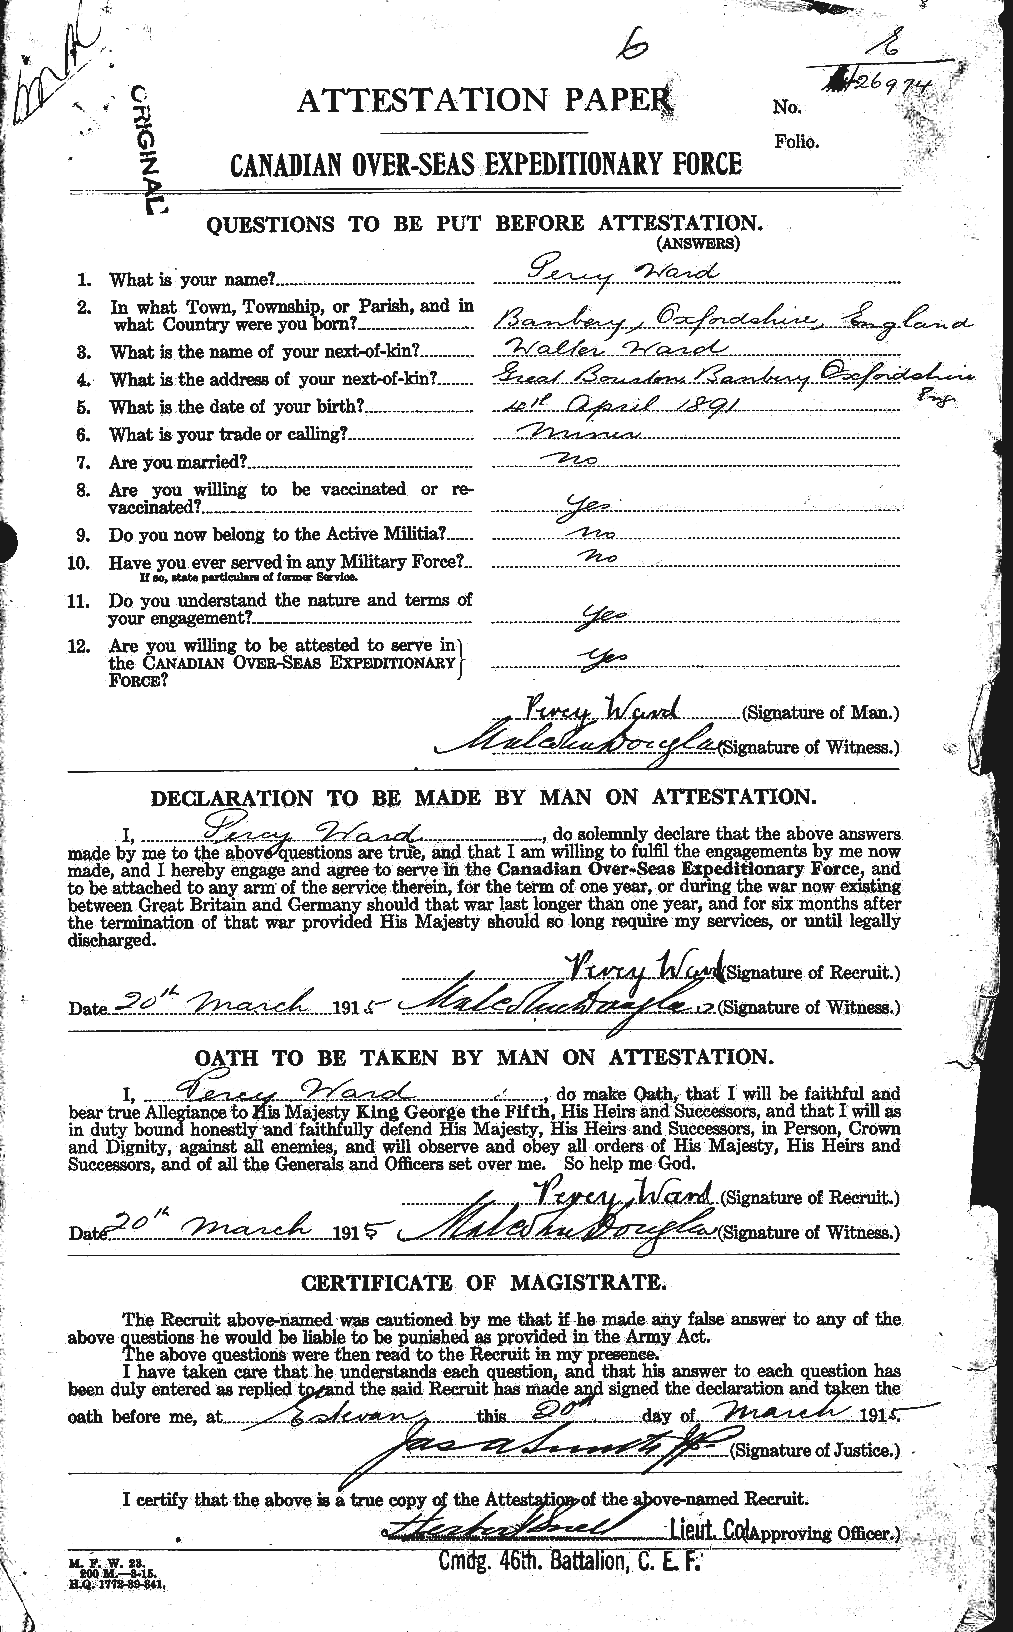 Personnel Records of the First World War - CEF 659621a